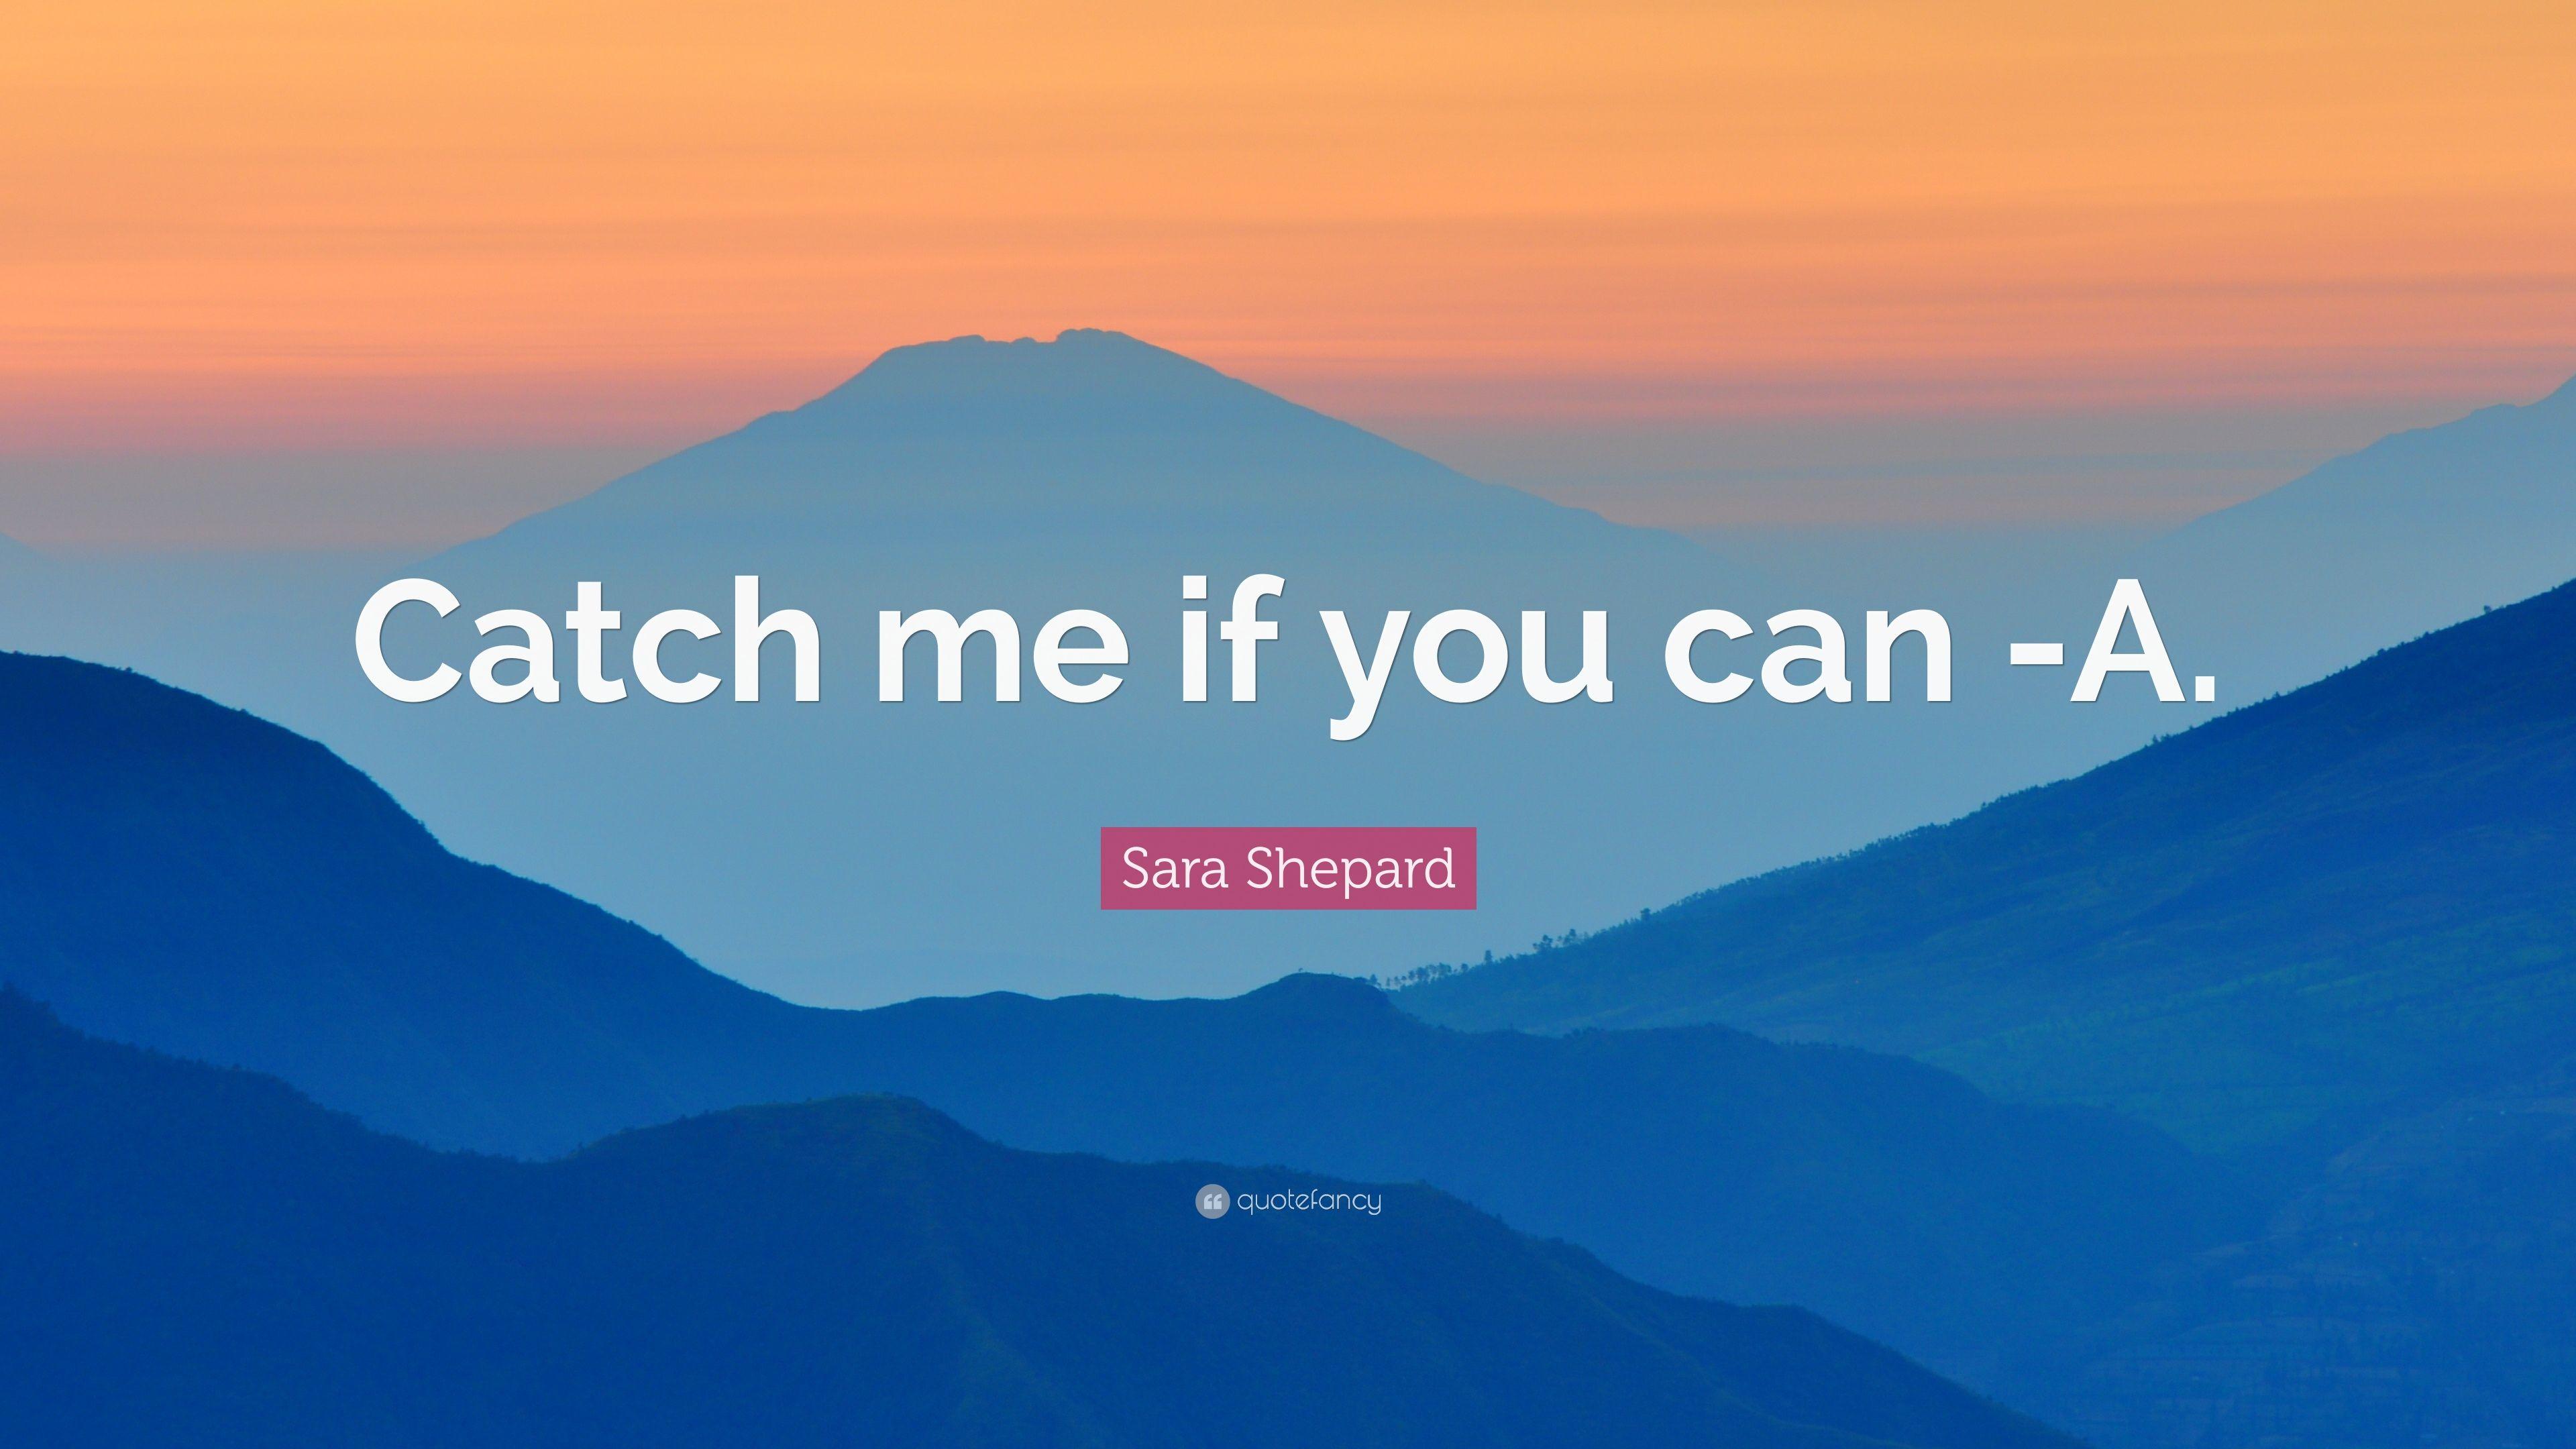 Sara Shepard Quote: “Catch me if you can -A.” 7 wallpaper